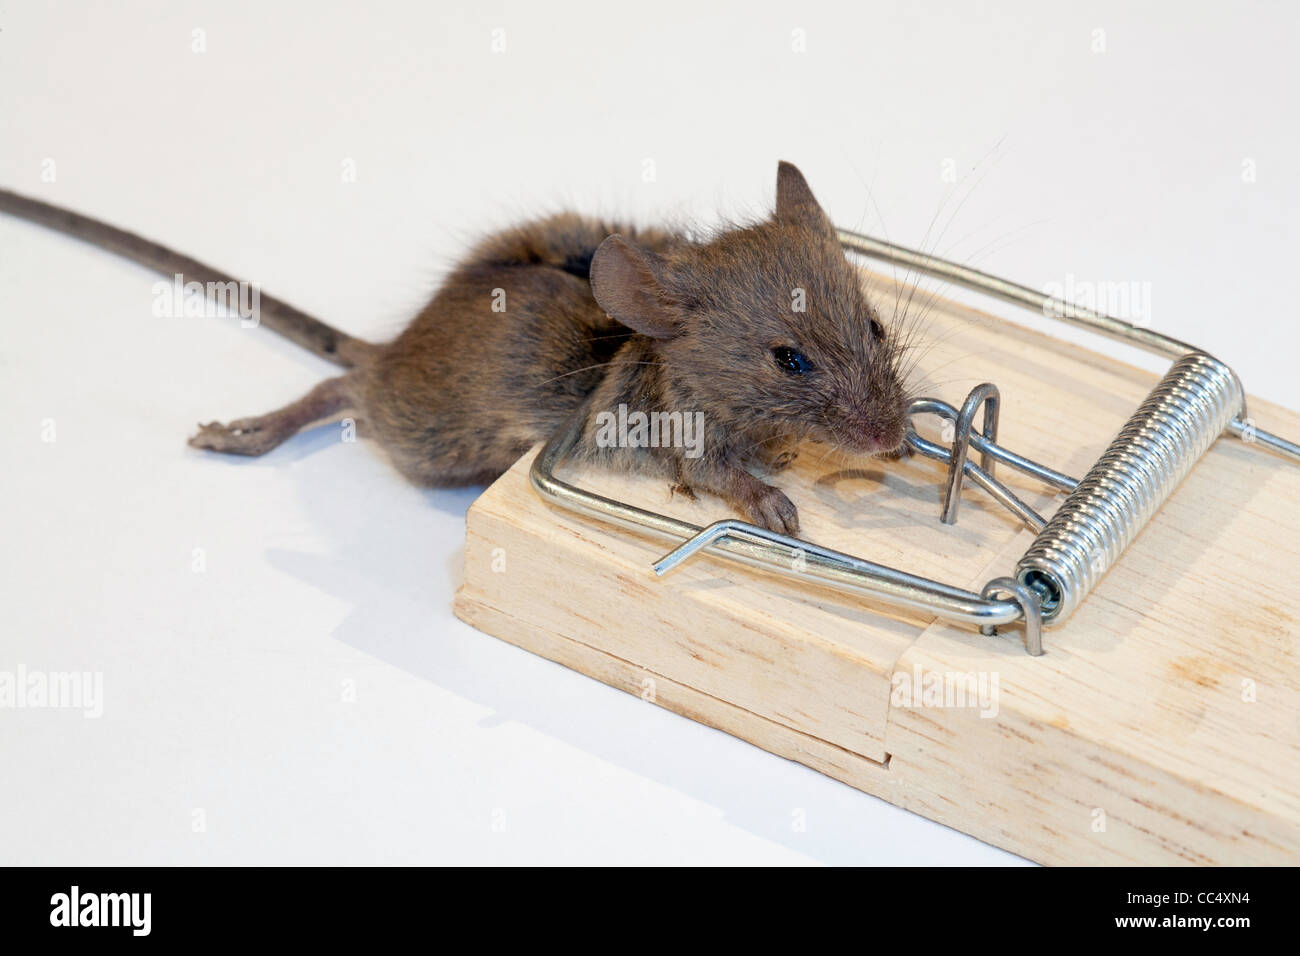 Mouse caught in mousetrap on white background Stock Photo